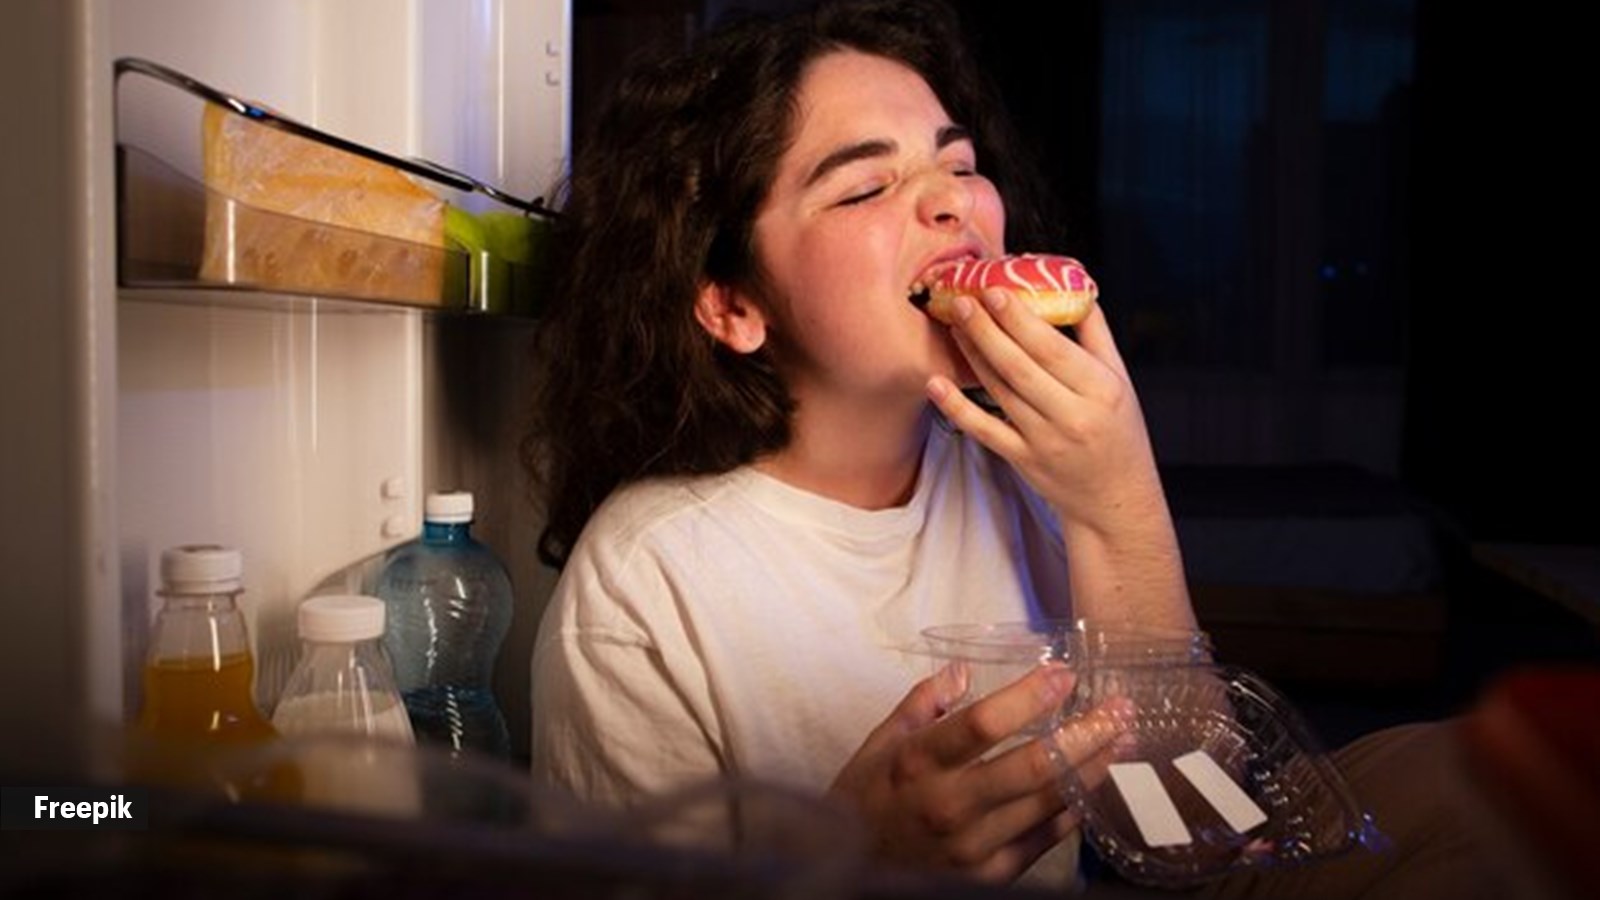 Midnight Cravings Solutions: 10 Expert Tips To Stop Eating Late at